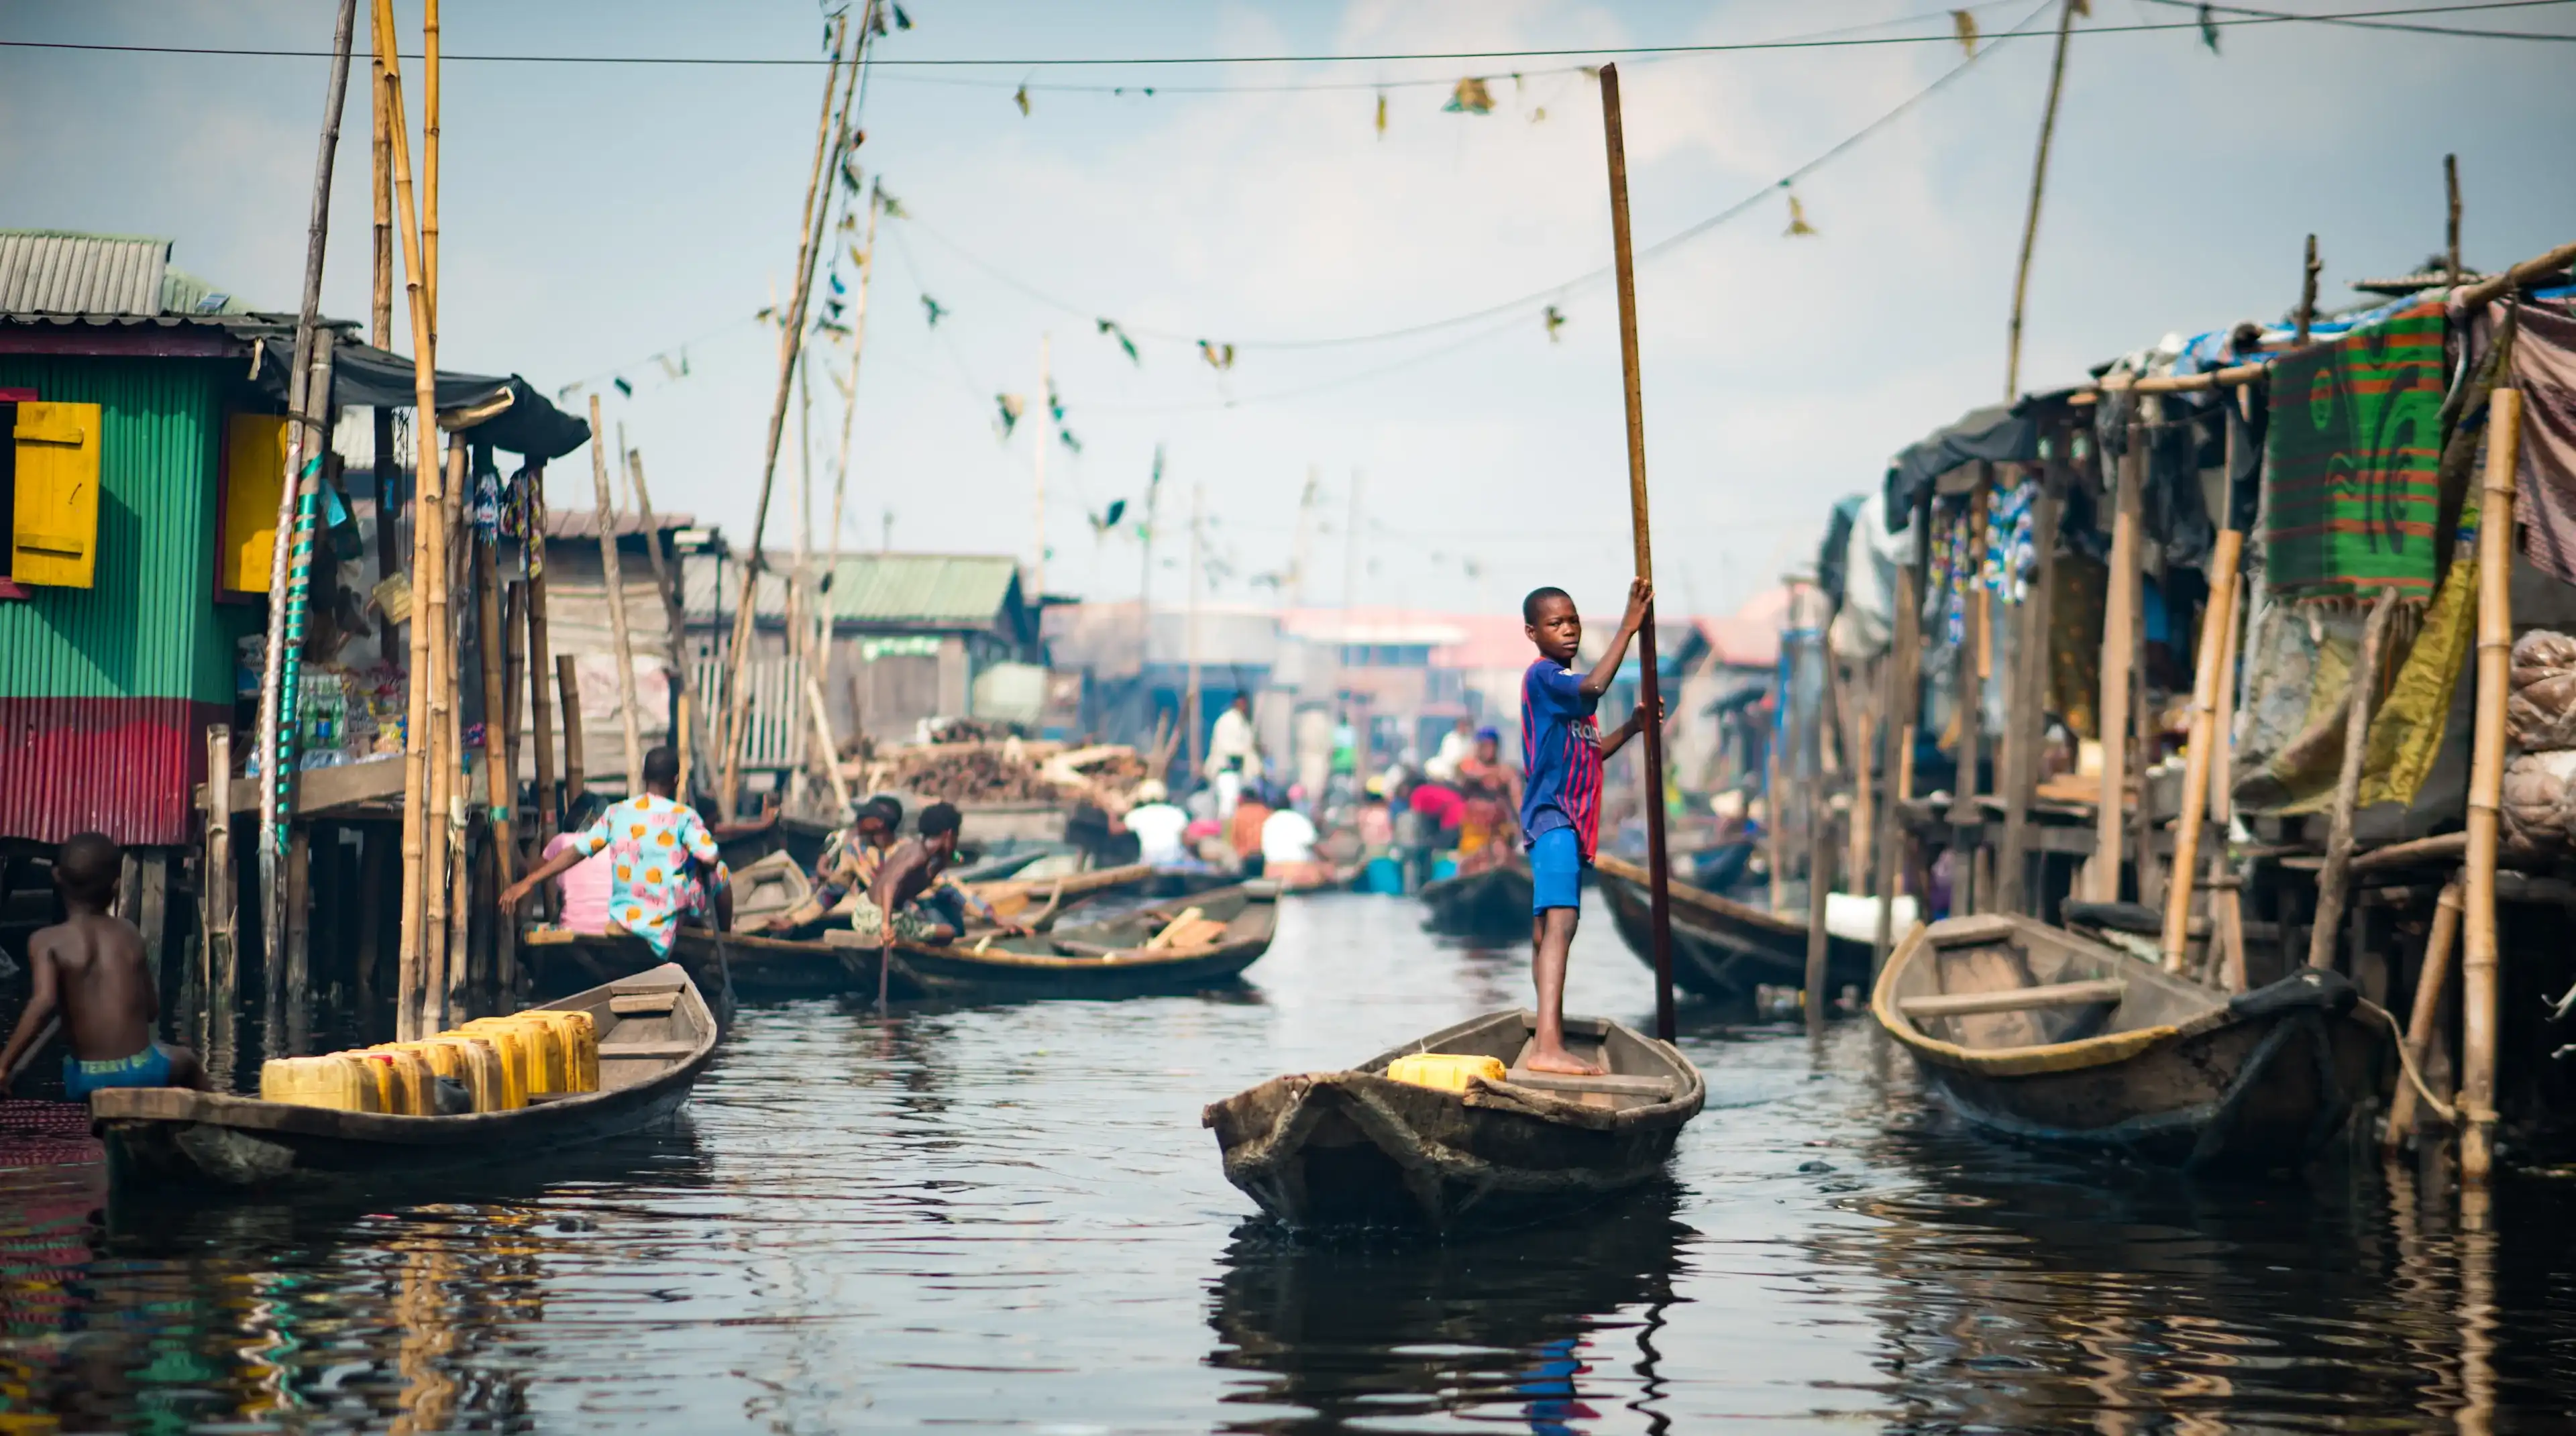 A young boy rowing a Canoe in the Makoko Stilts Village, Lagos/ Nigeria taken on the 18th of May, 2019